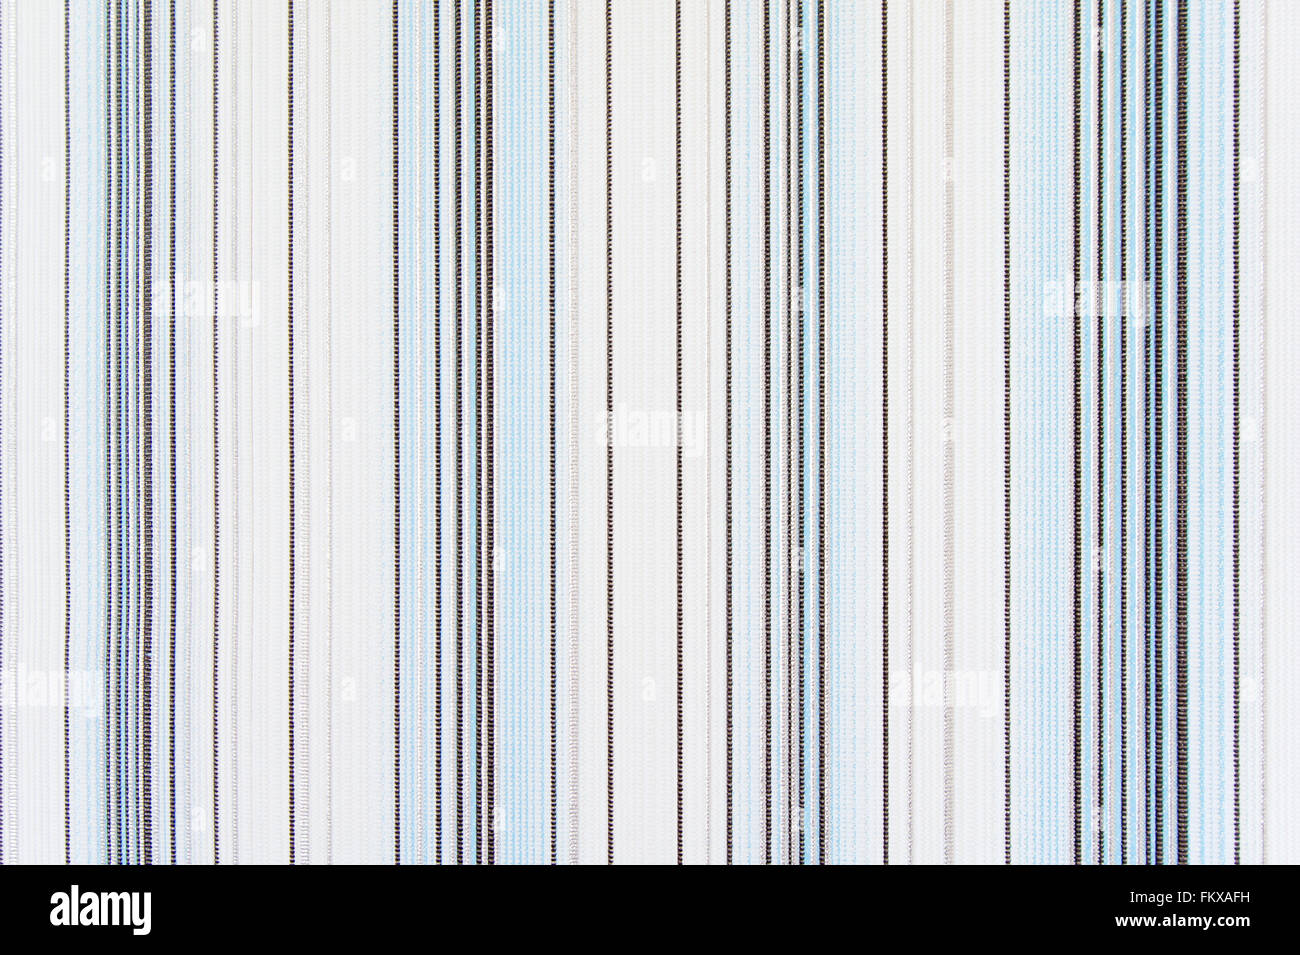 Black, white, blue and silver colors striped paper texture background Stock Photo